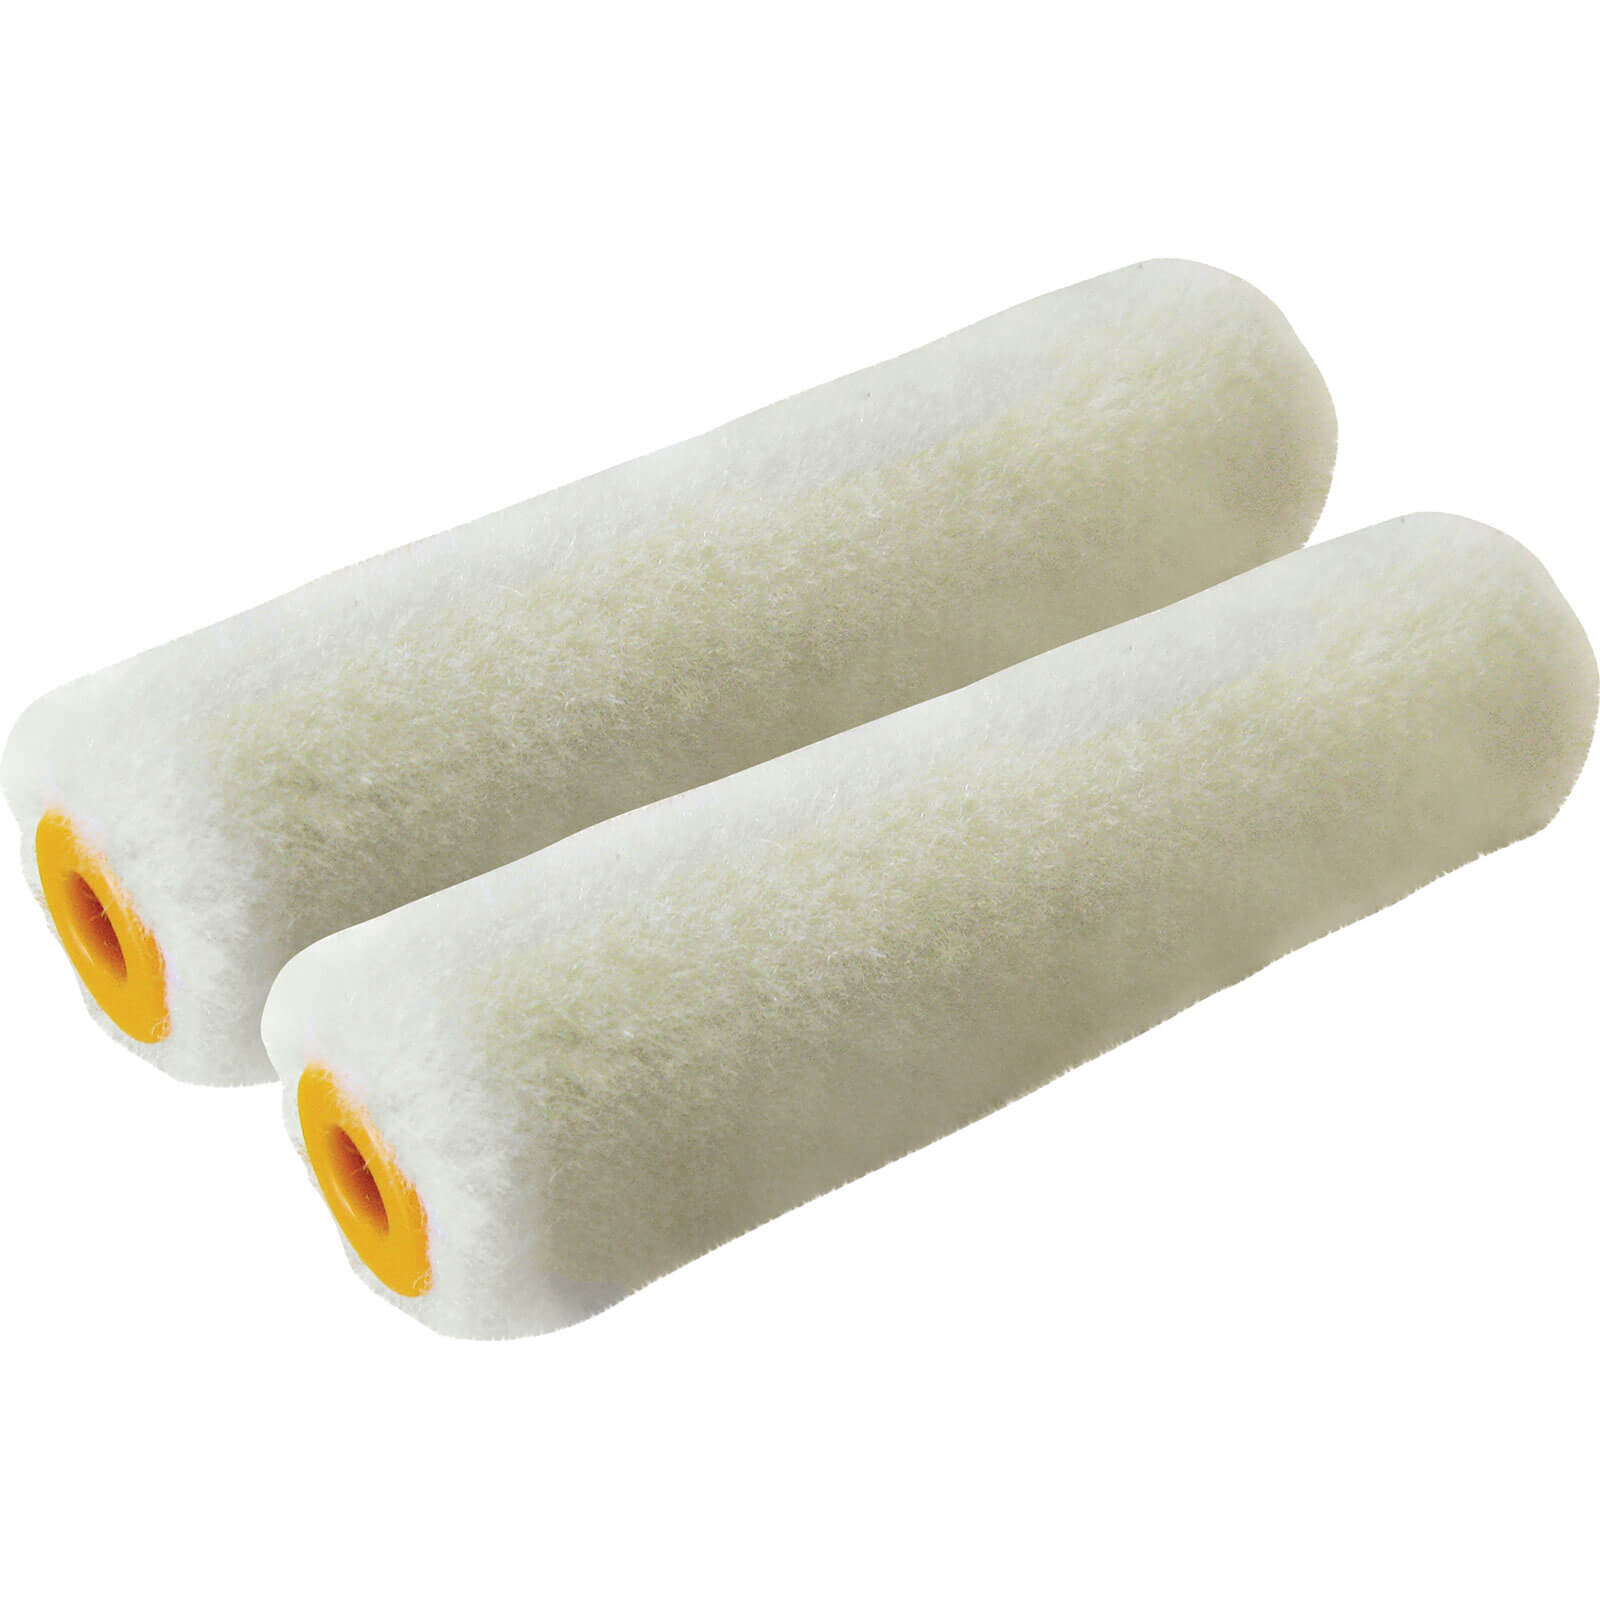 Image of Stanley Mini Mohair Gloss Paint Roller Sleeve 100mm Pack of 2